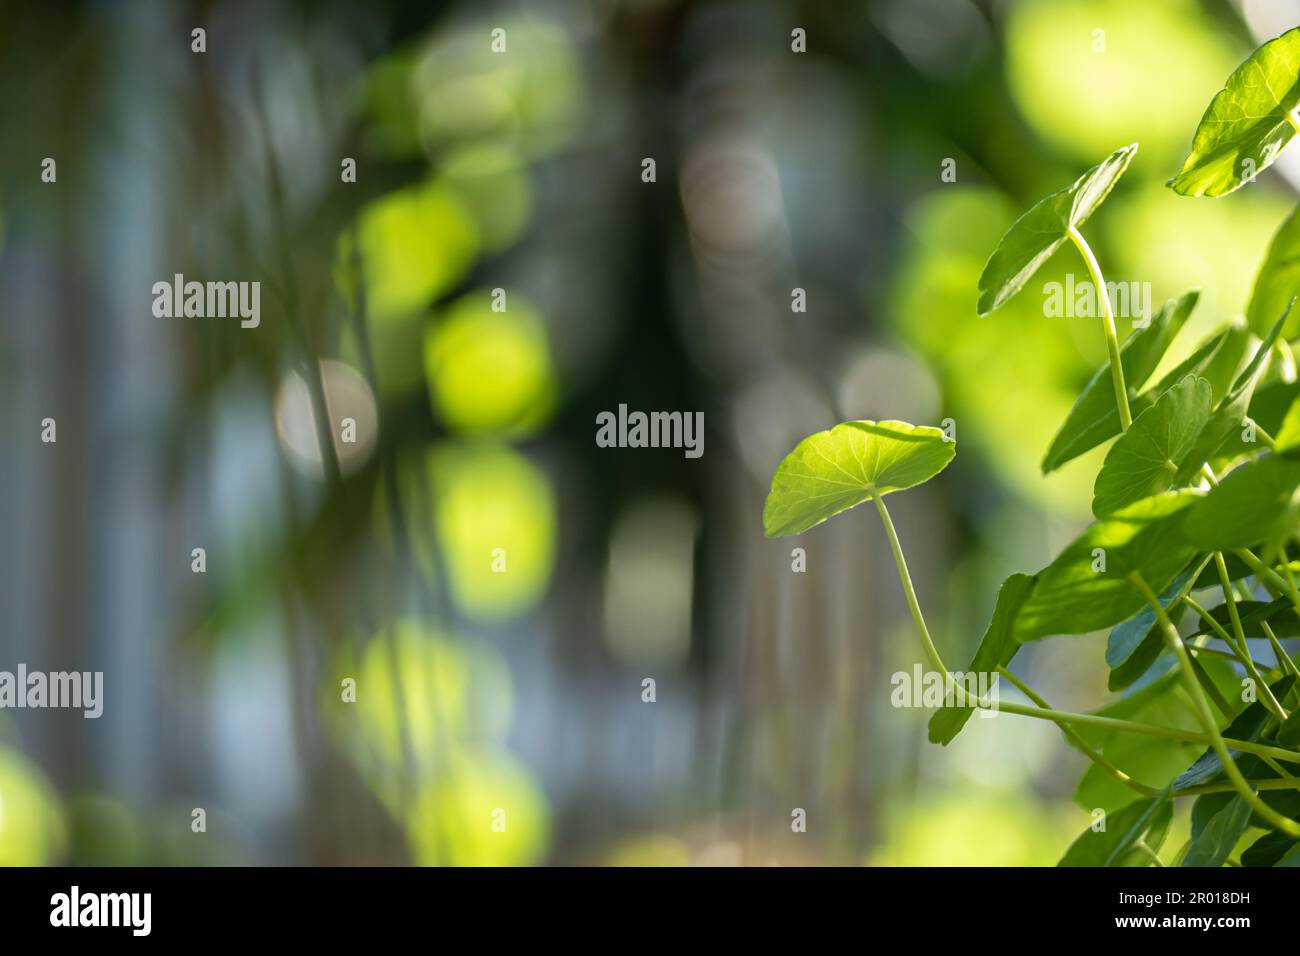 Full-frame leaves of Hydrocotyle umbellate as nature background Stock Photo